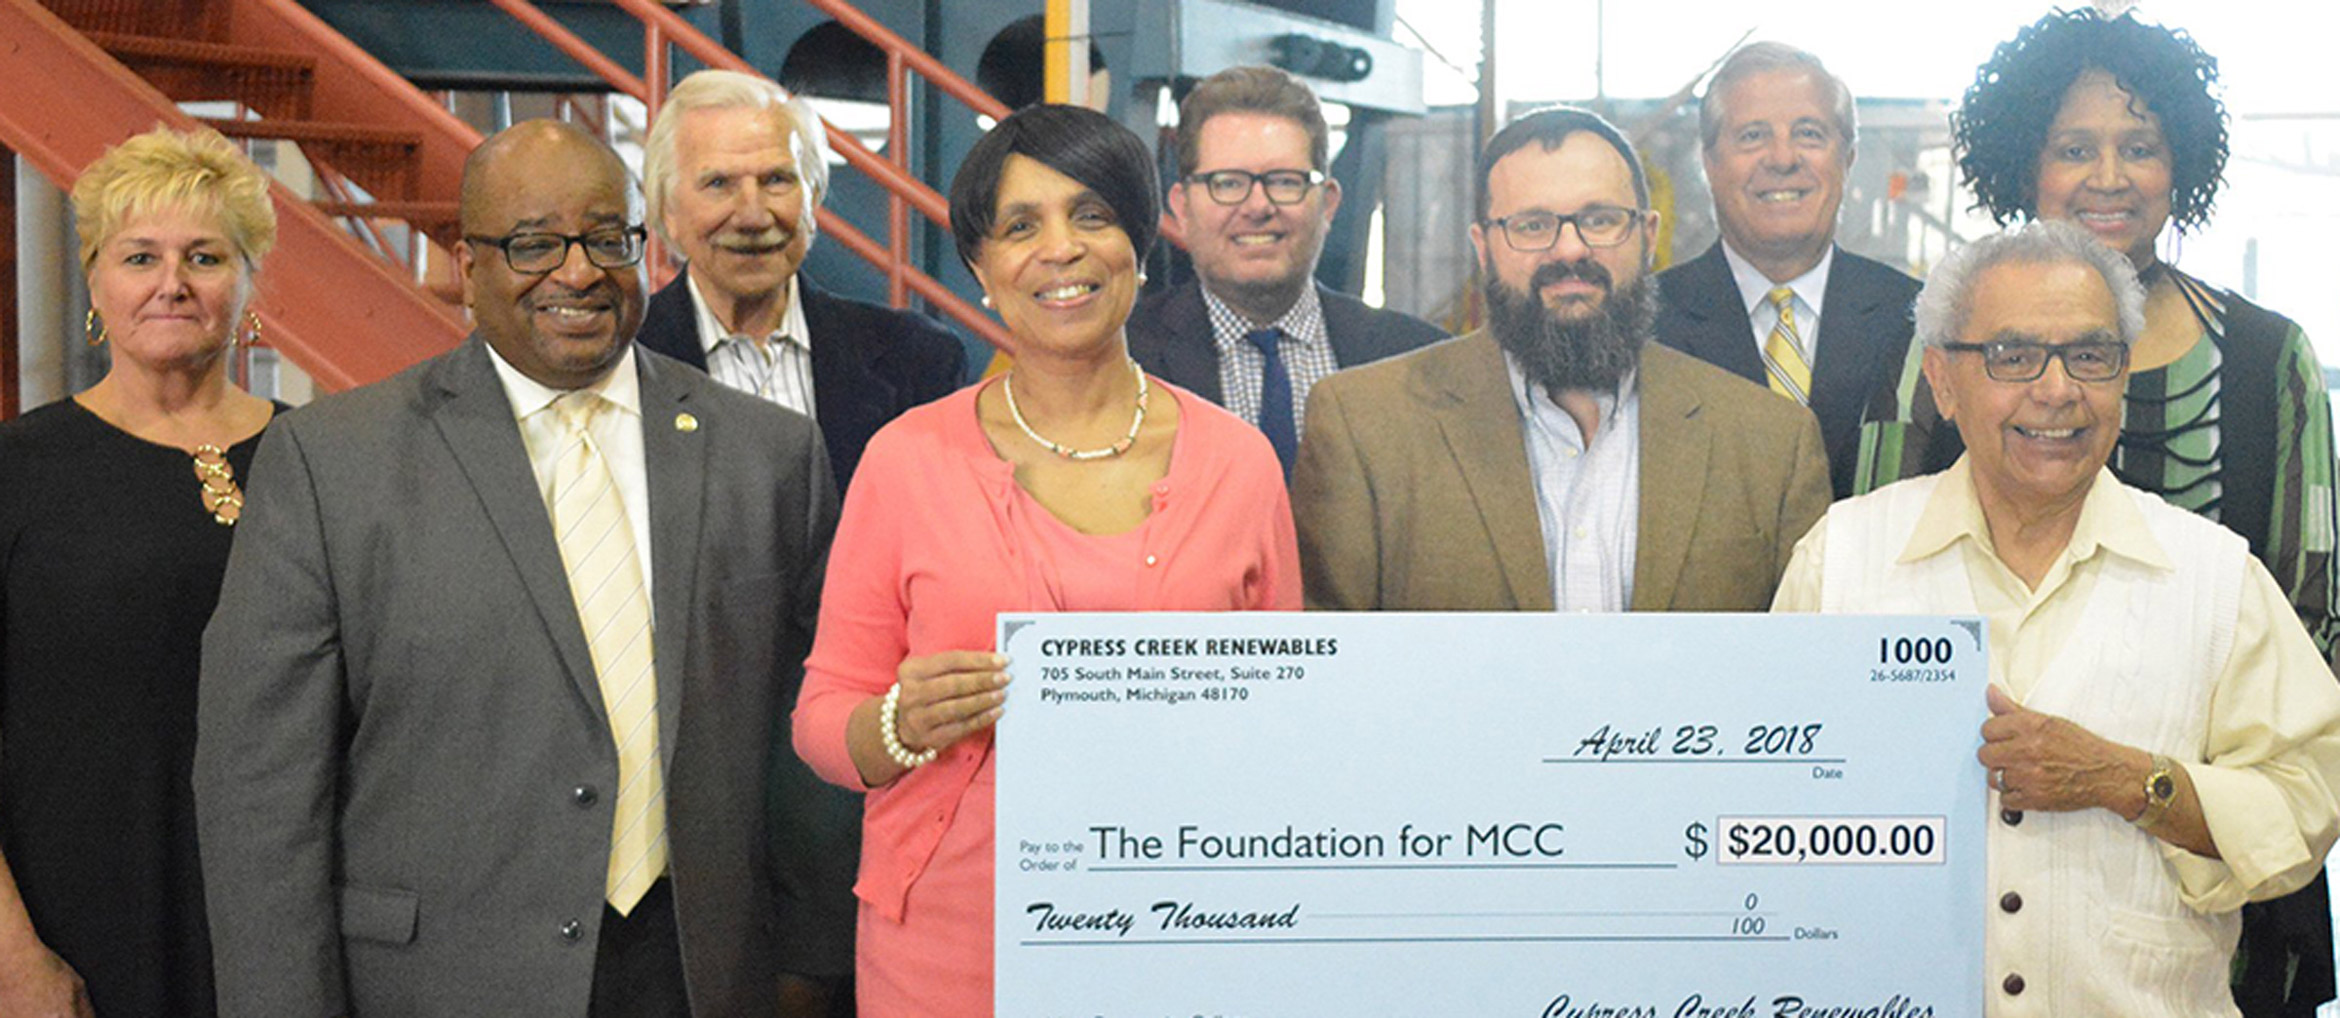 Group of men and women pose with large check at college partnership announcement